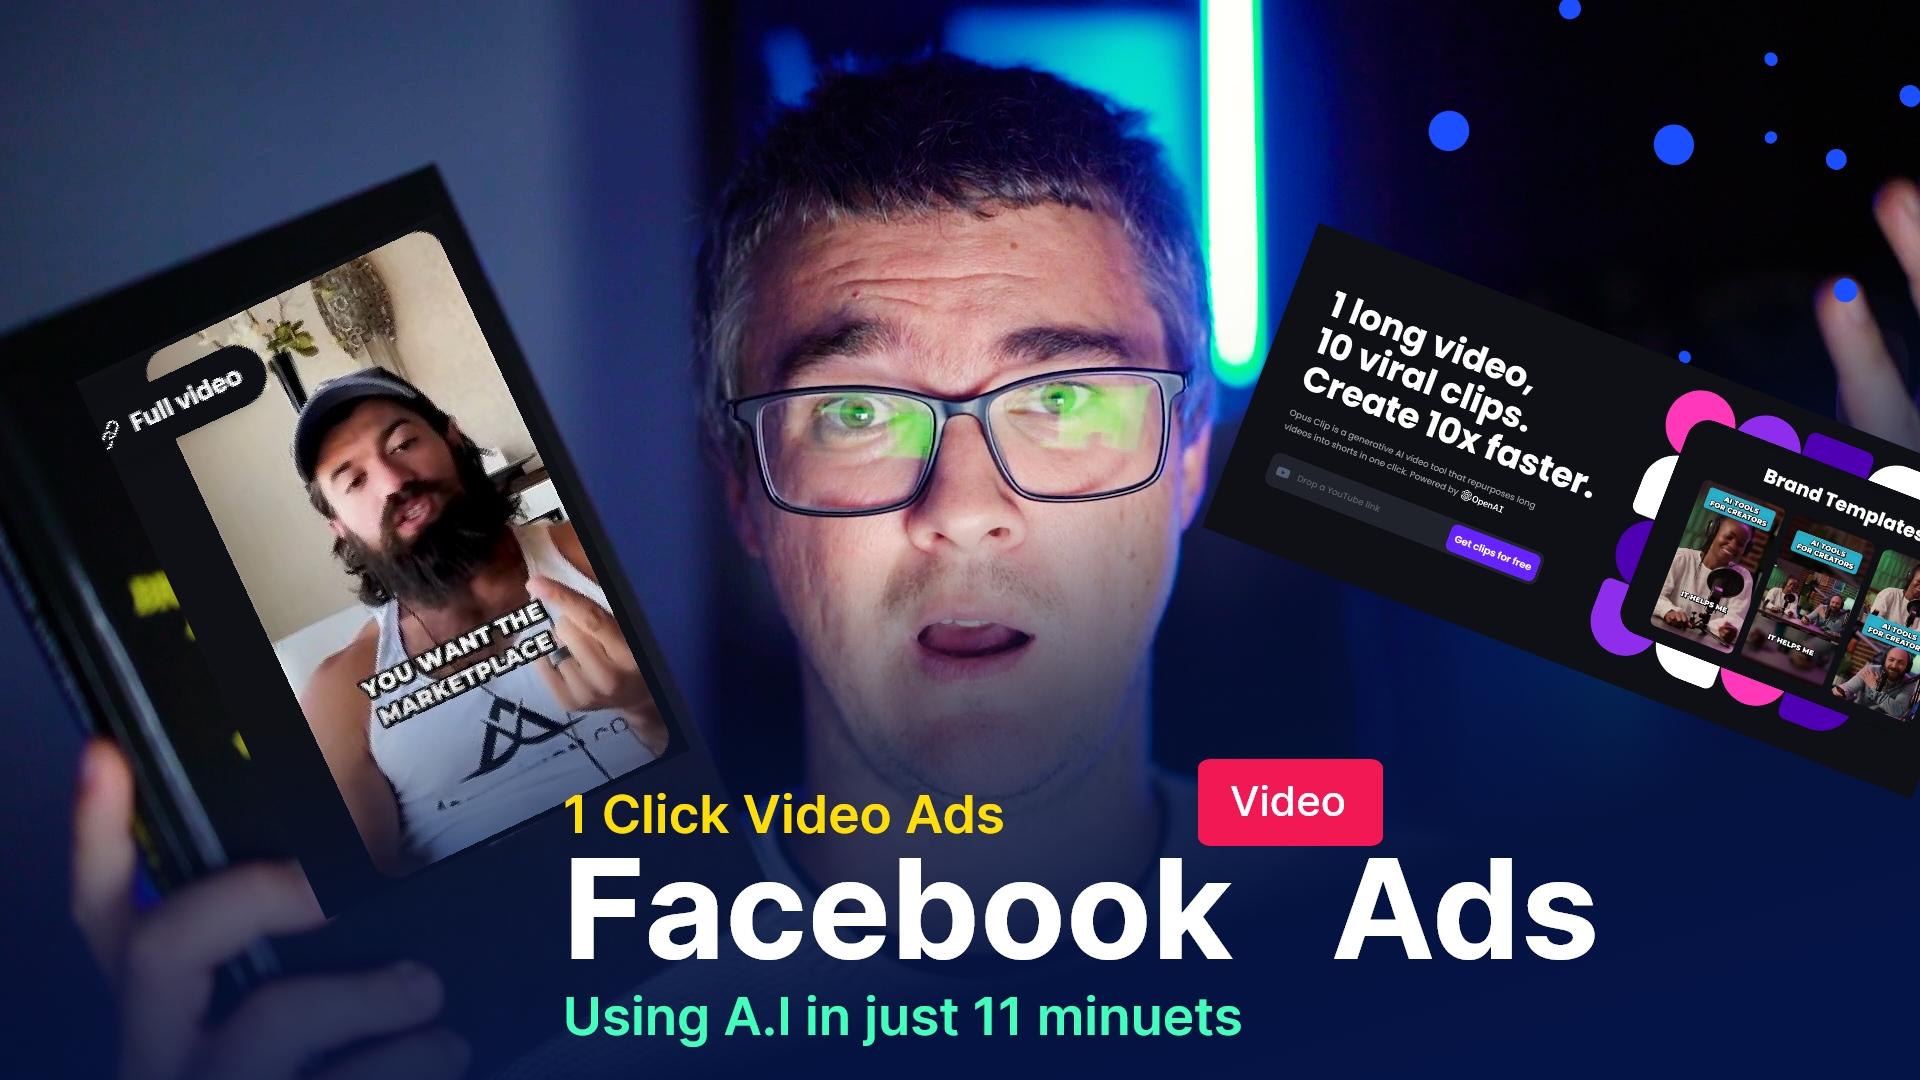 Create many Facebook Video Ads (or Shorts for Instagram/YouTube) in minuets with A.I [Hormozi Style]